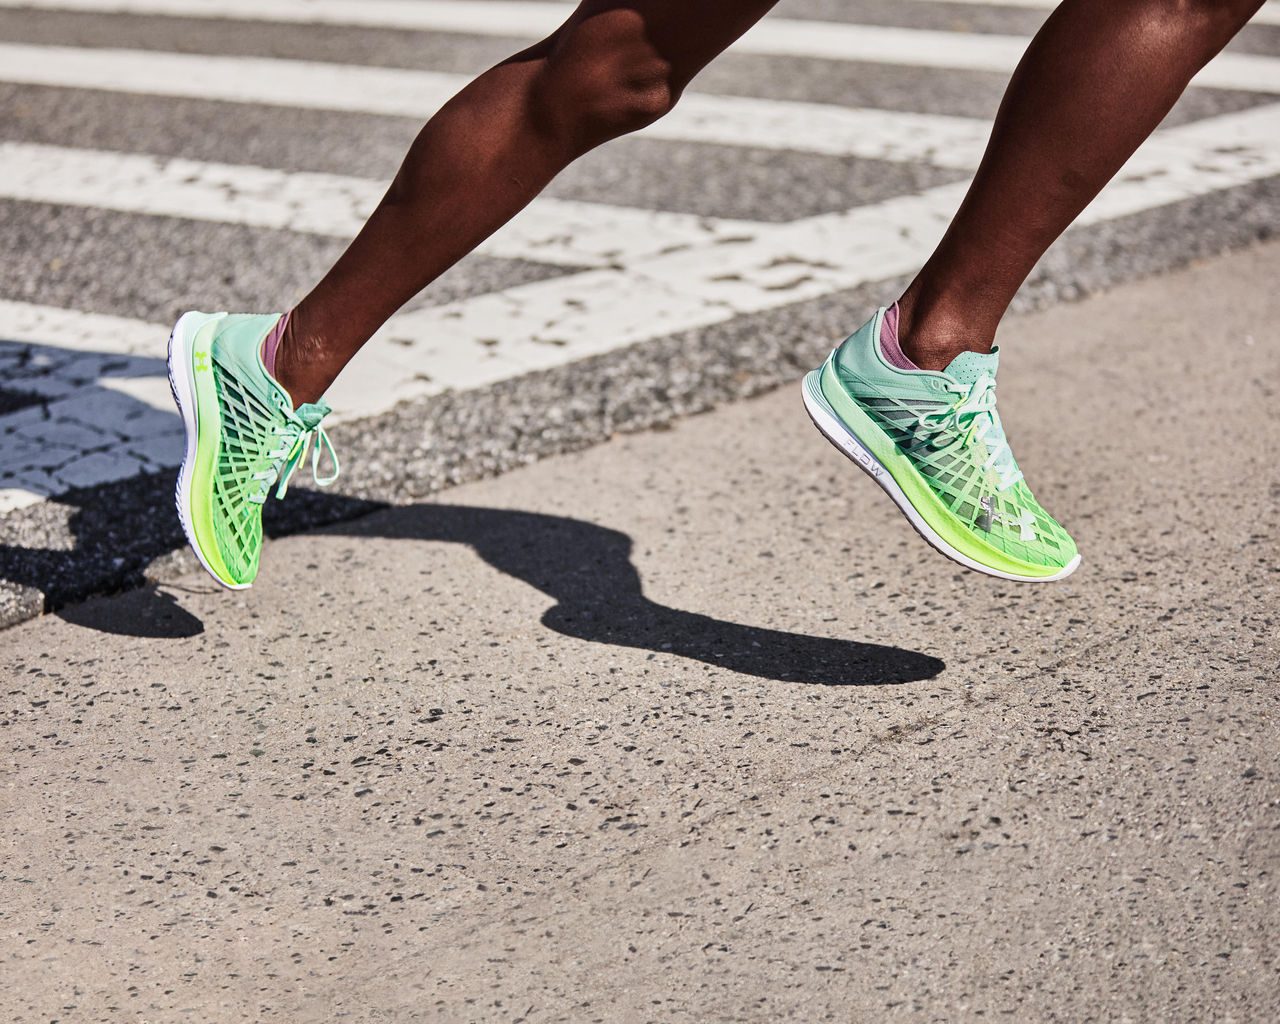 Fast Just Got Faster With Two New Run Footwear Innovations From Under Armour